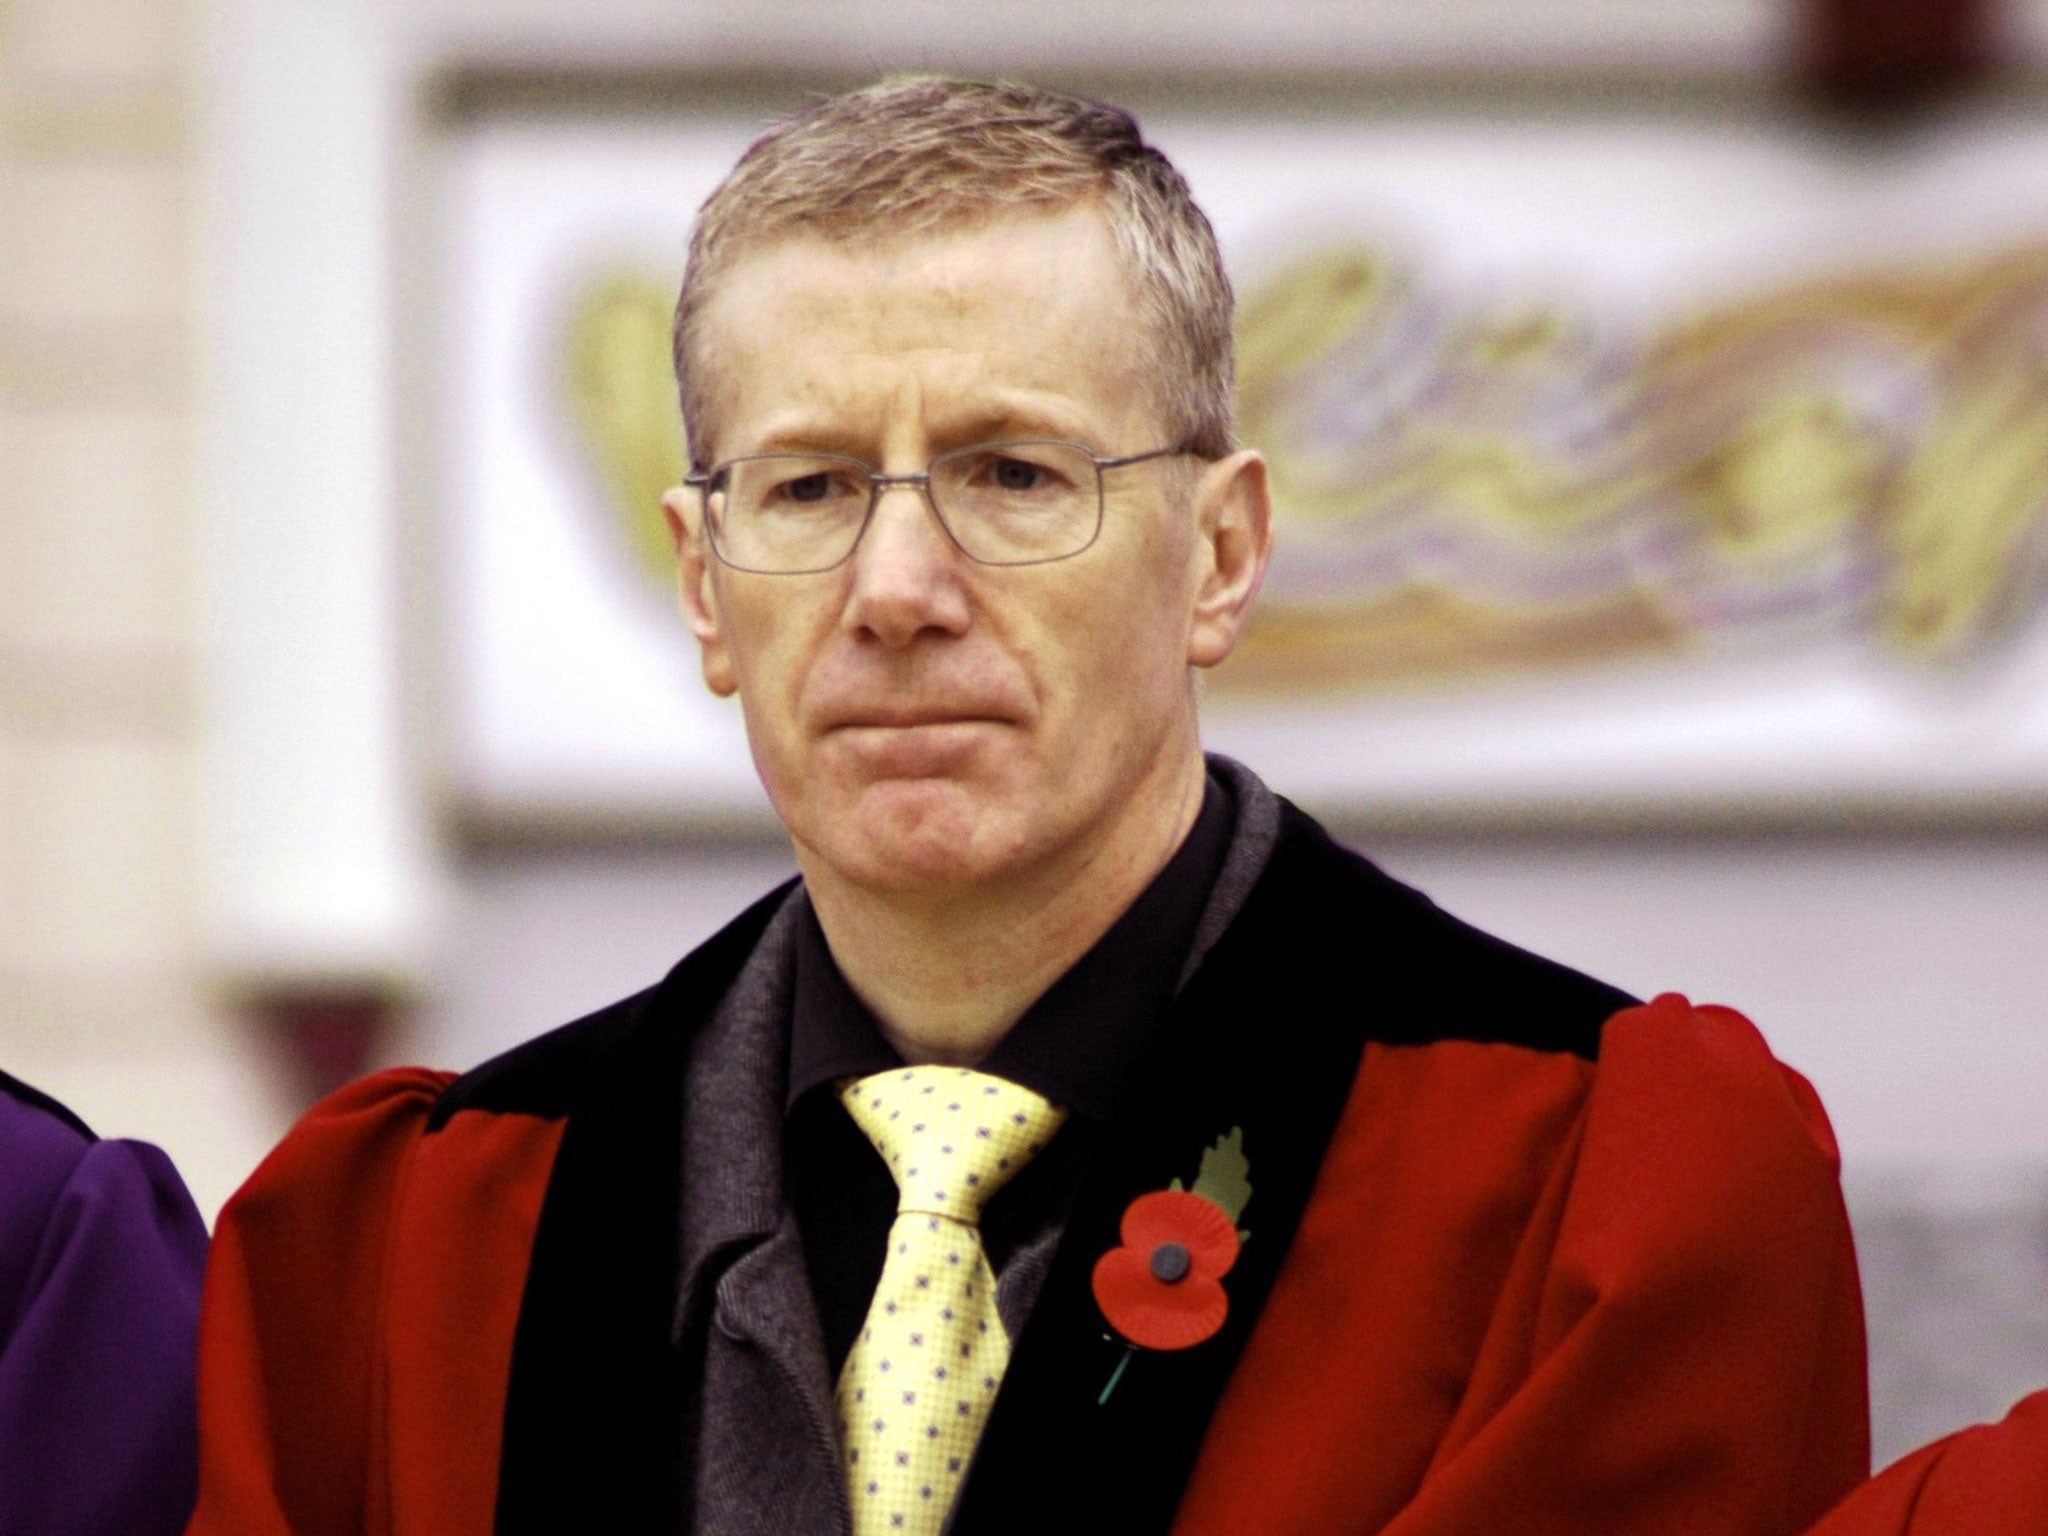 The Unionist MP Gregory Campbell told the House of Commons in 2013 that there had been up to 100 victims of sexual abuse and he was aware of claims that a 'fixed committee' had been set up within the republican movement to study those claims